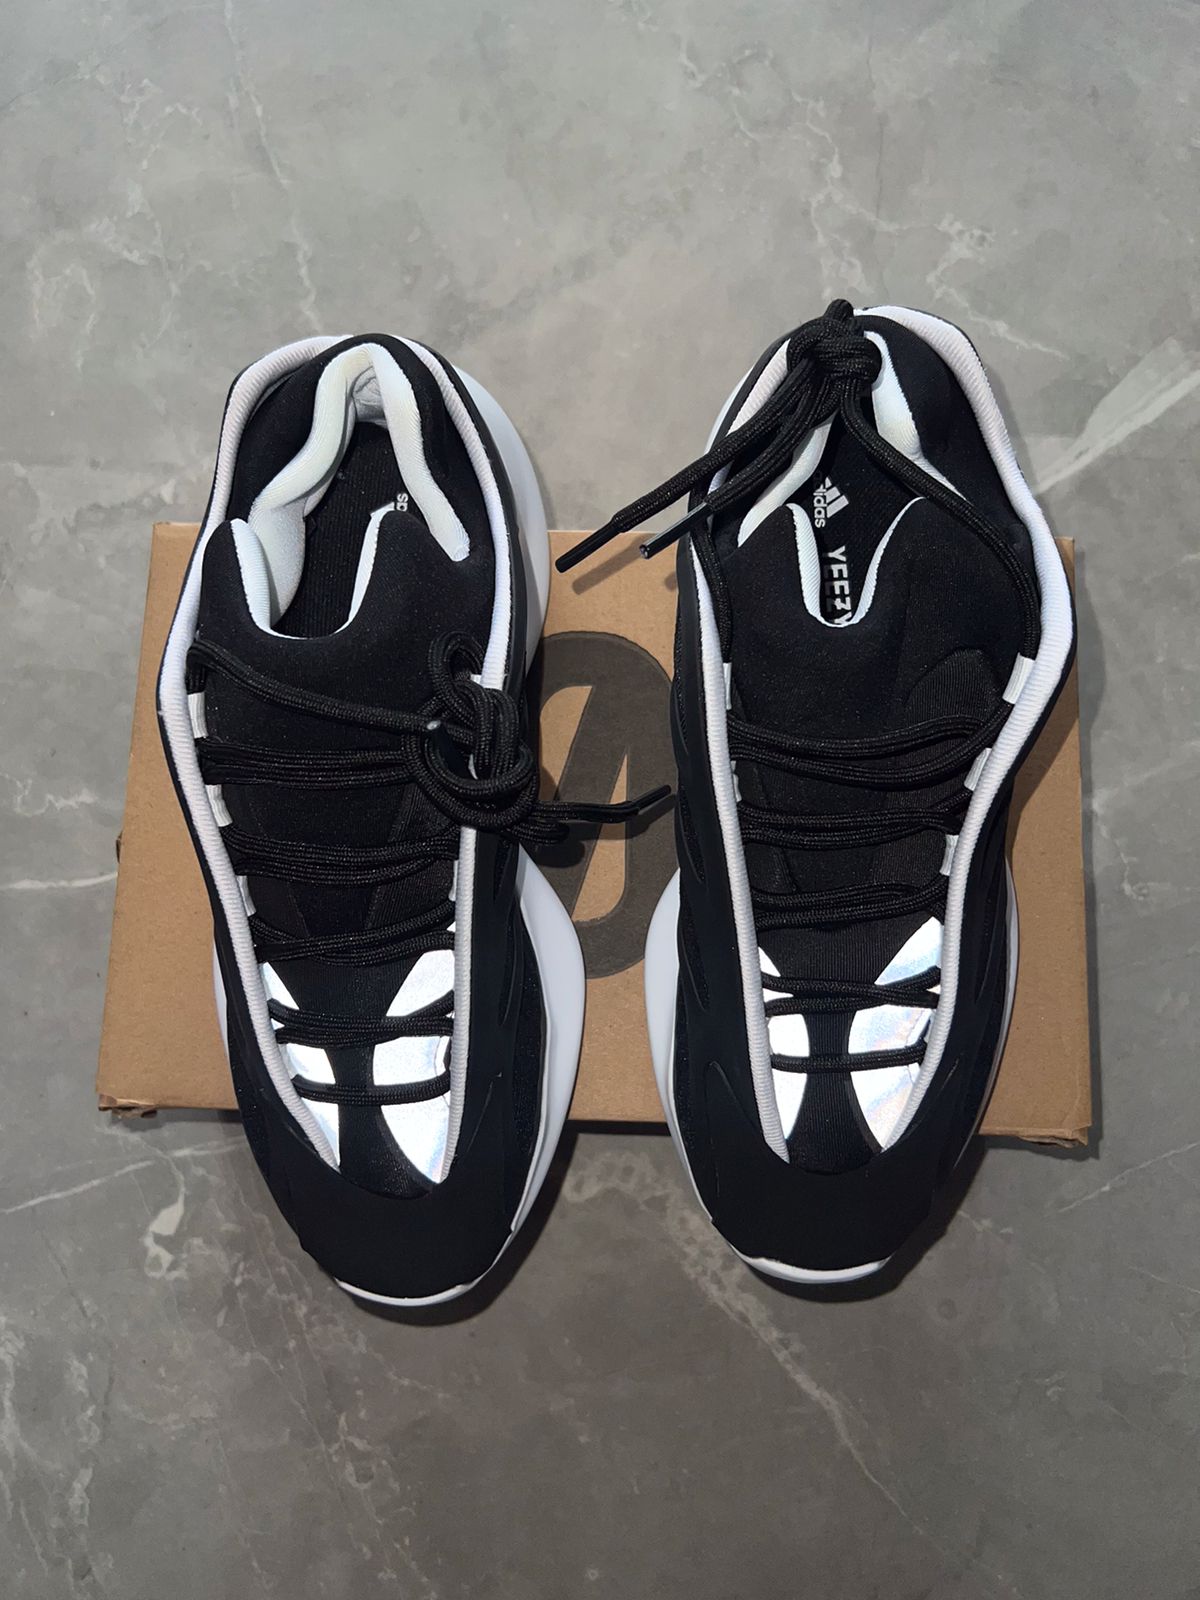 Imported Latest Yzy 700 V3 Sneakers In Stock